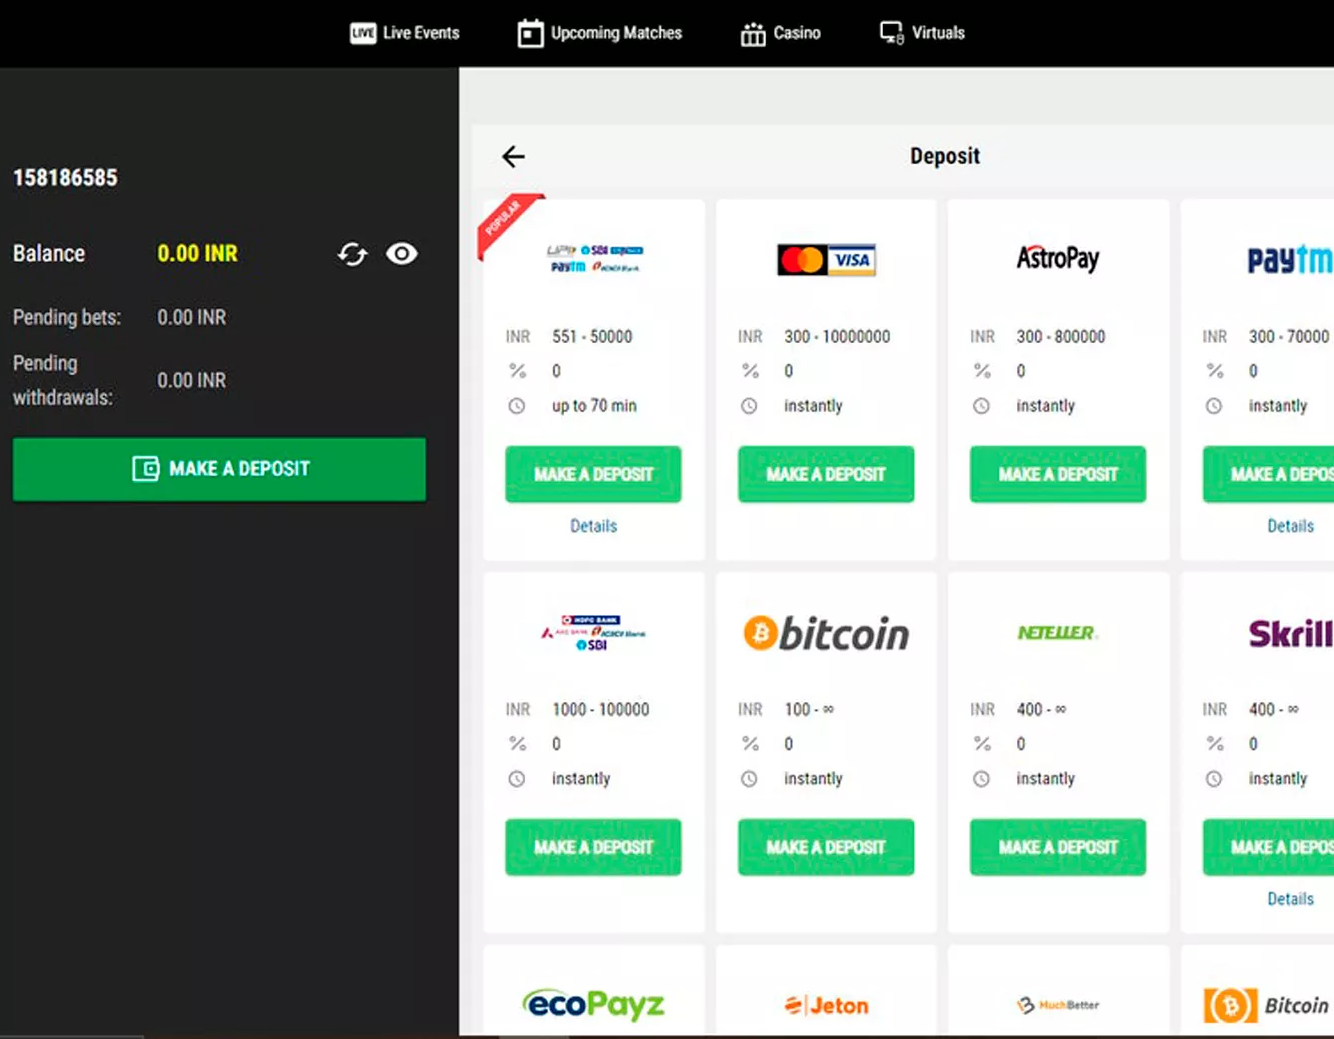 Parimatch account interface with options to make a deposit and different payment methods